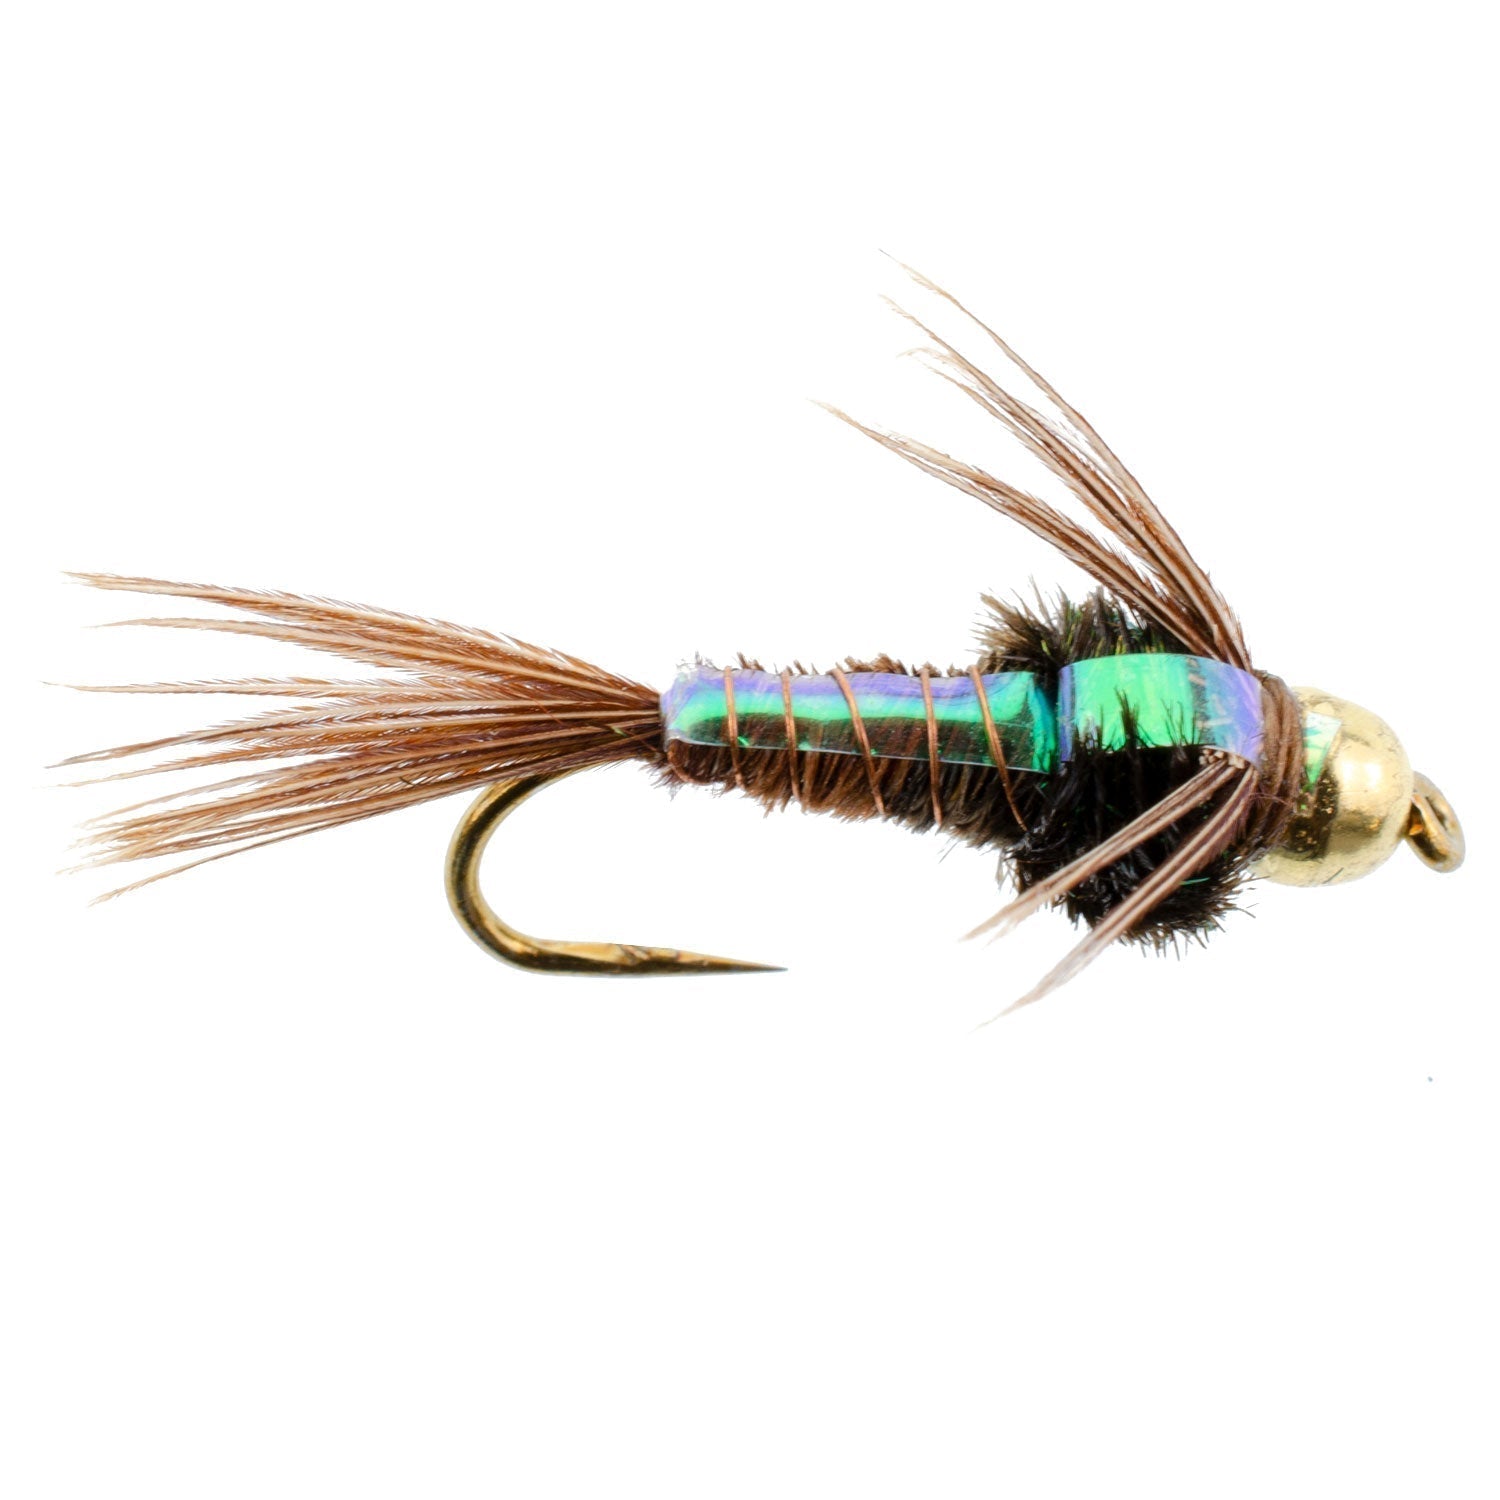 3 Pack Barbless Bead Head Flashback Pheasant Tail Nymph Flies Hook Size 18